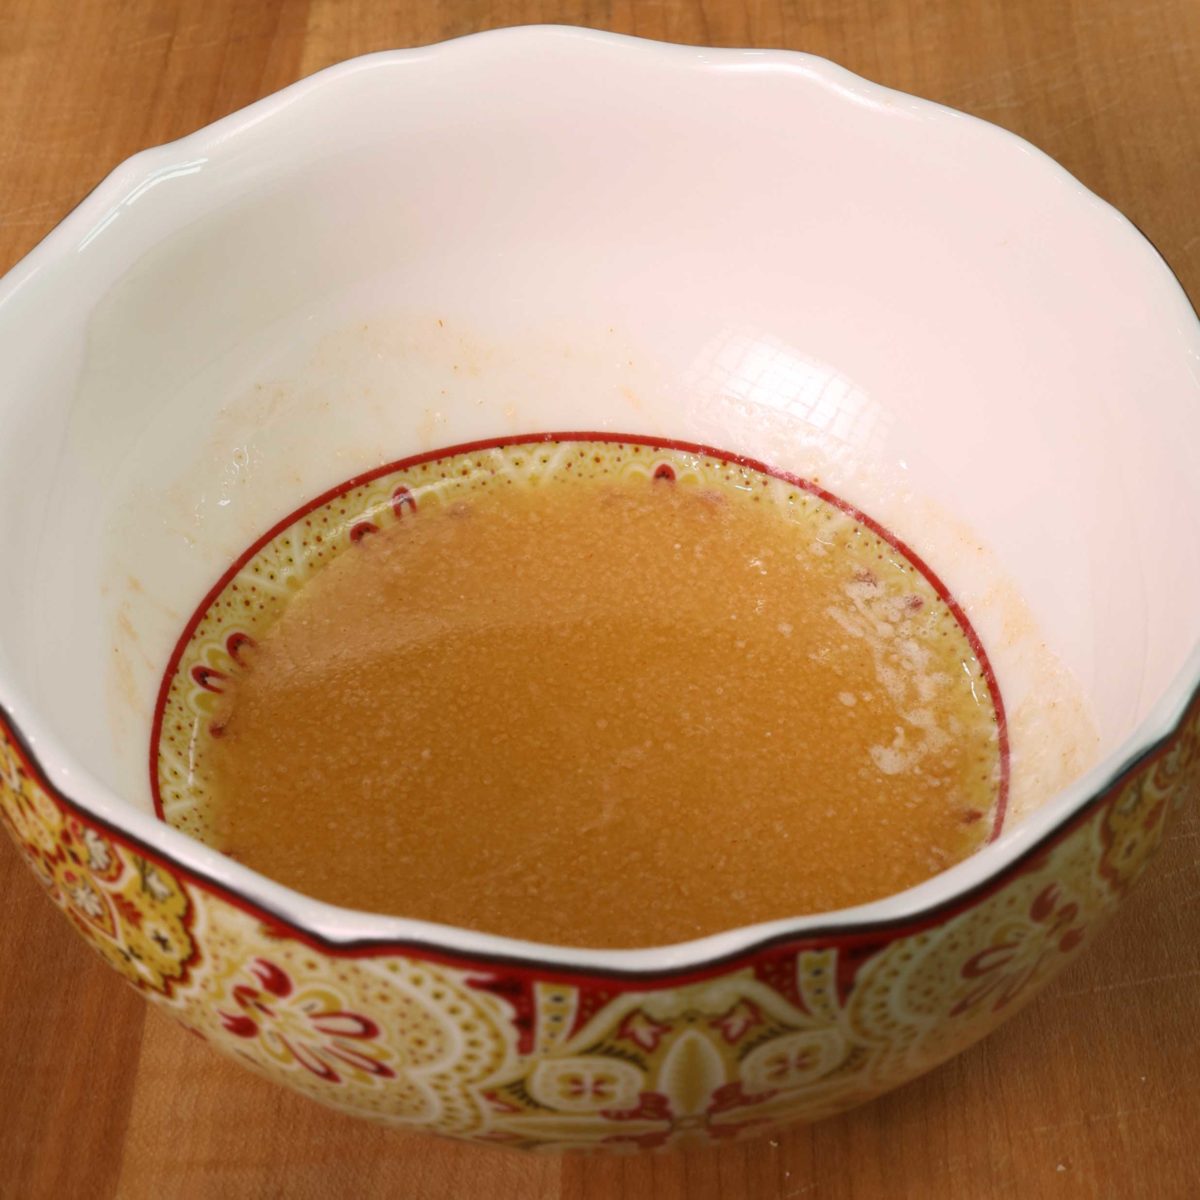 homemade buffalo sauce in a small red and white bowl on a wooden table